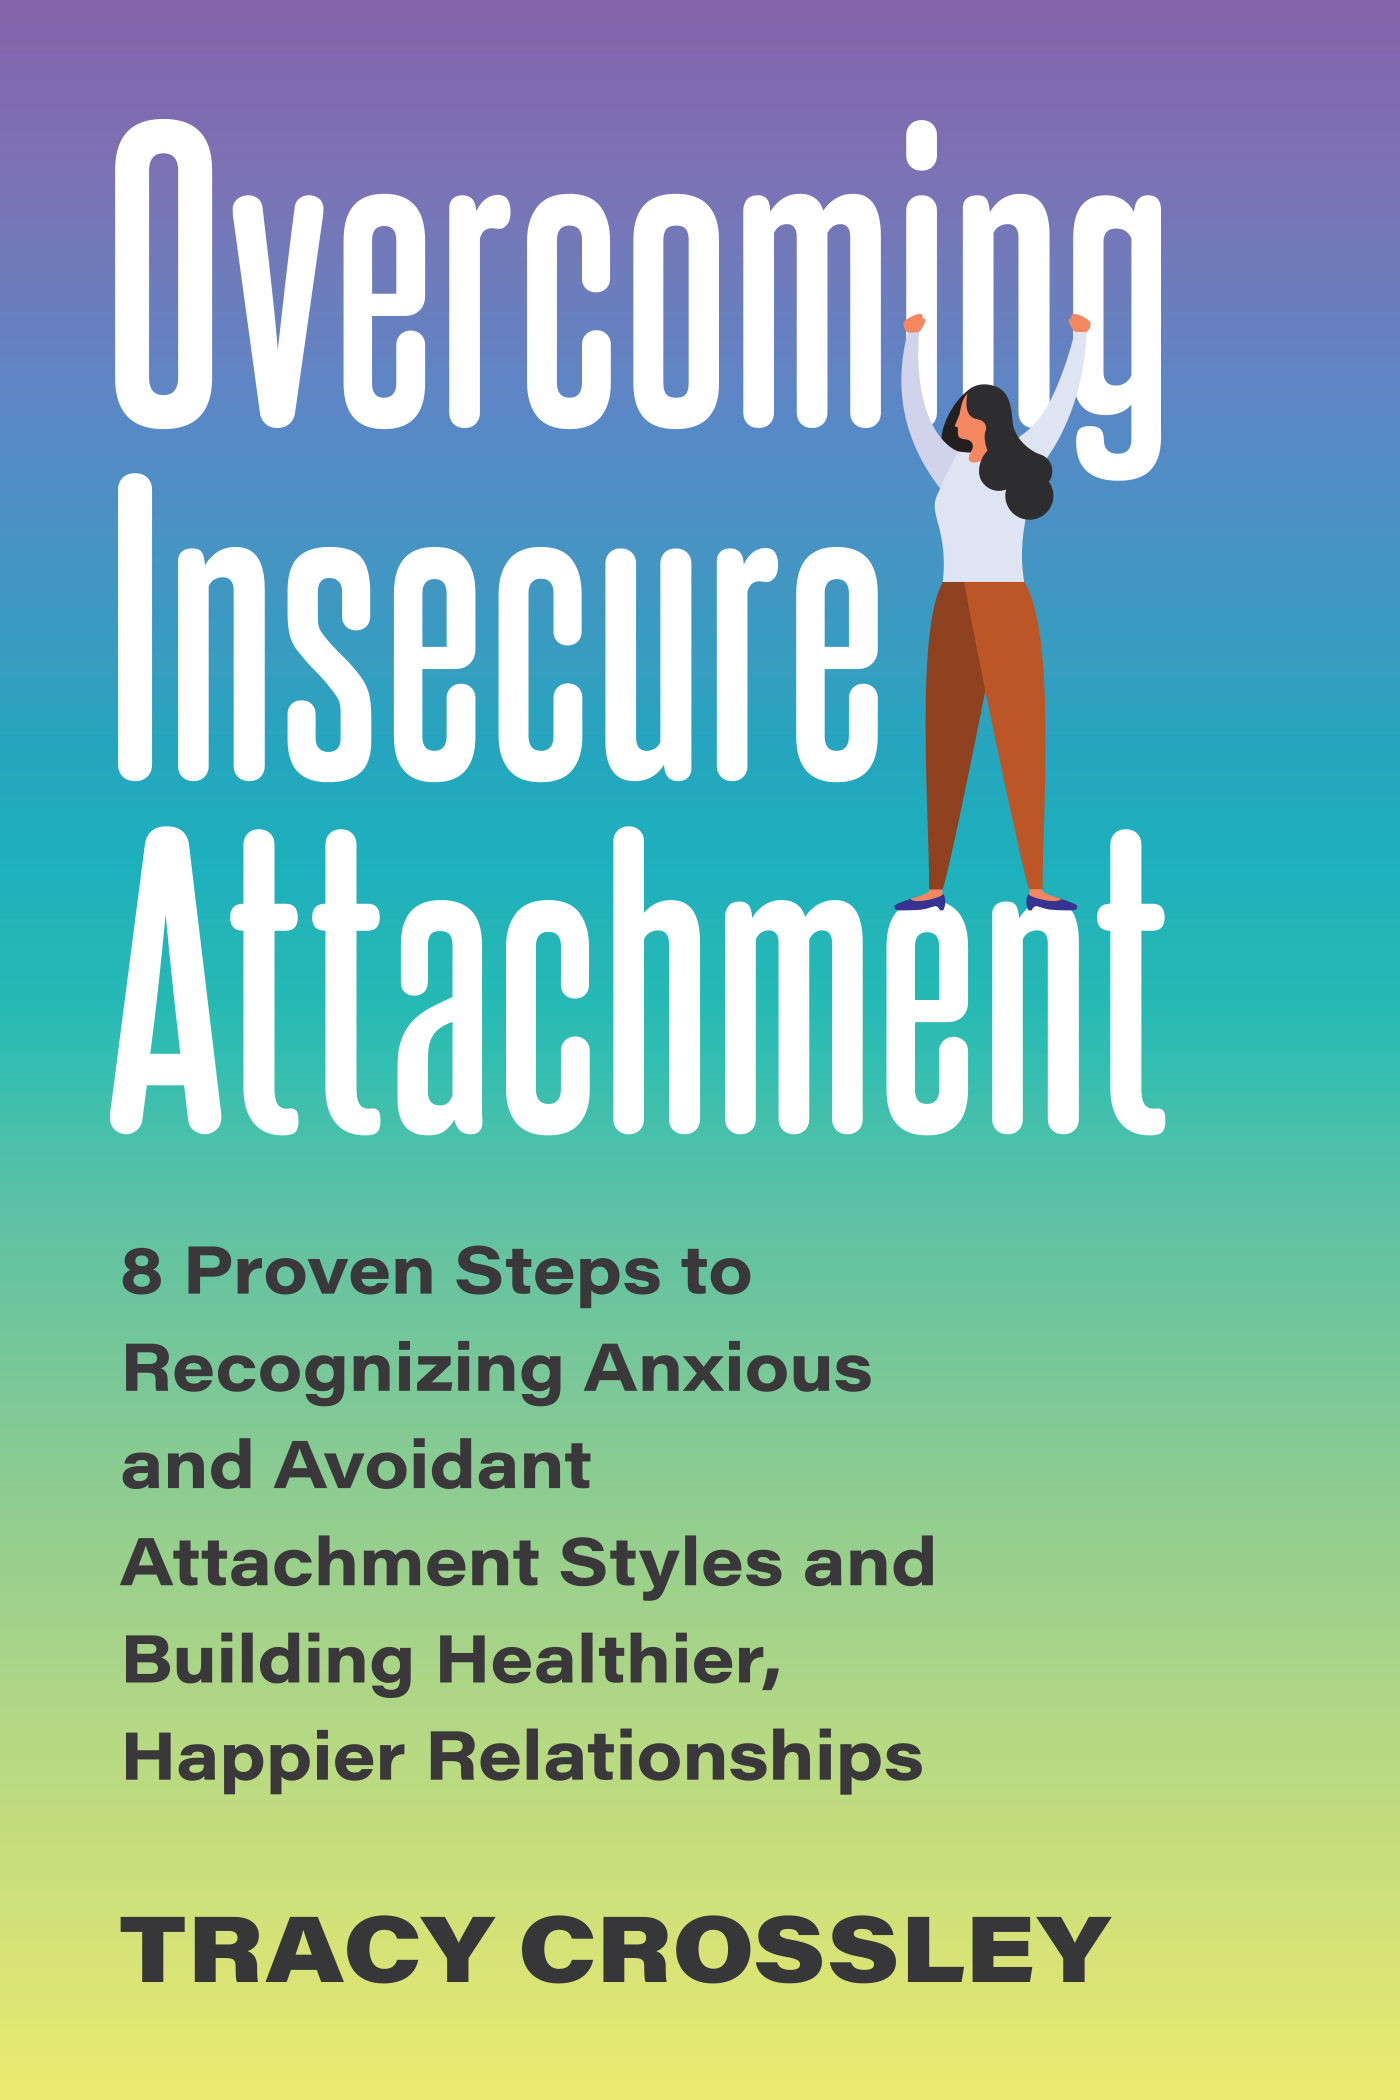 Overcoming Insecure Attachment-front.indd